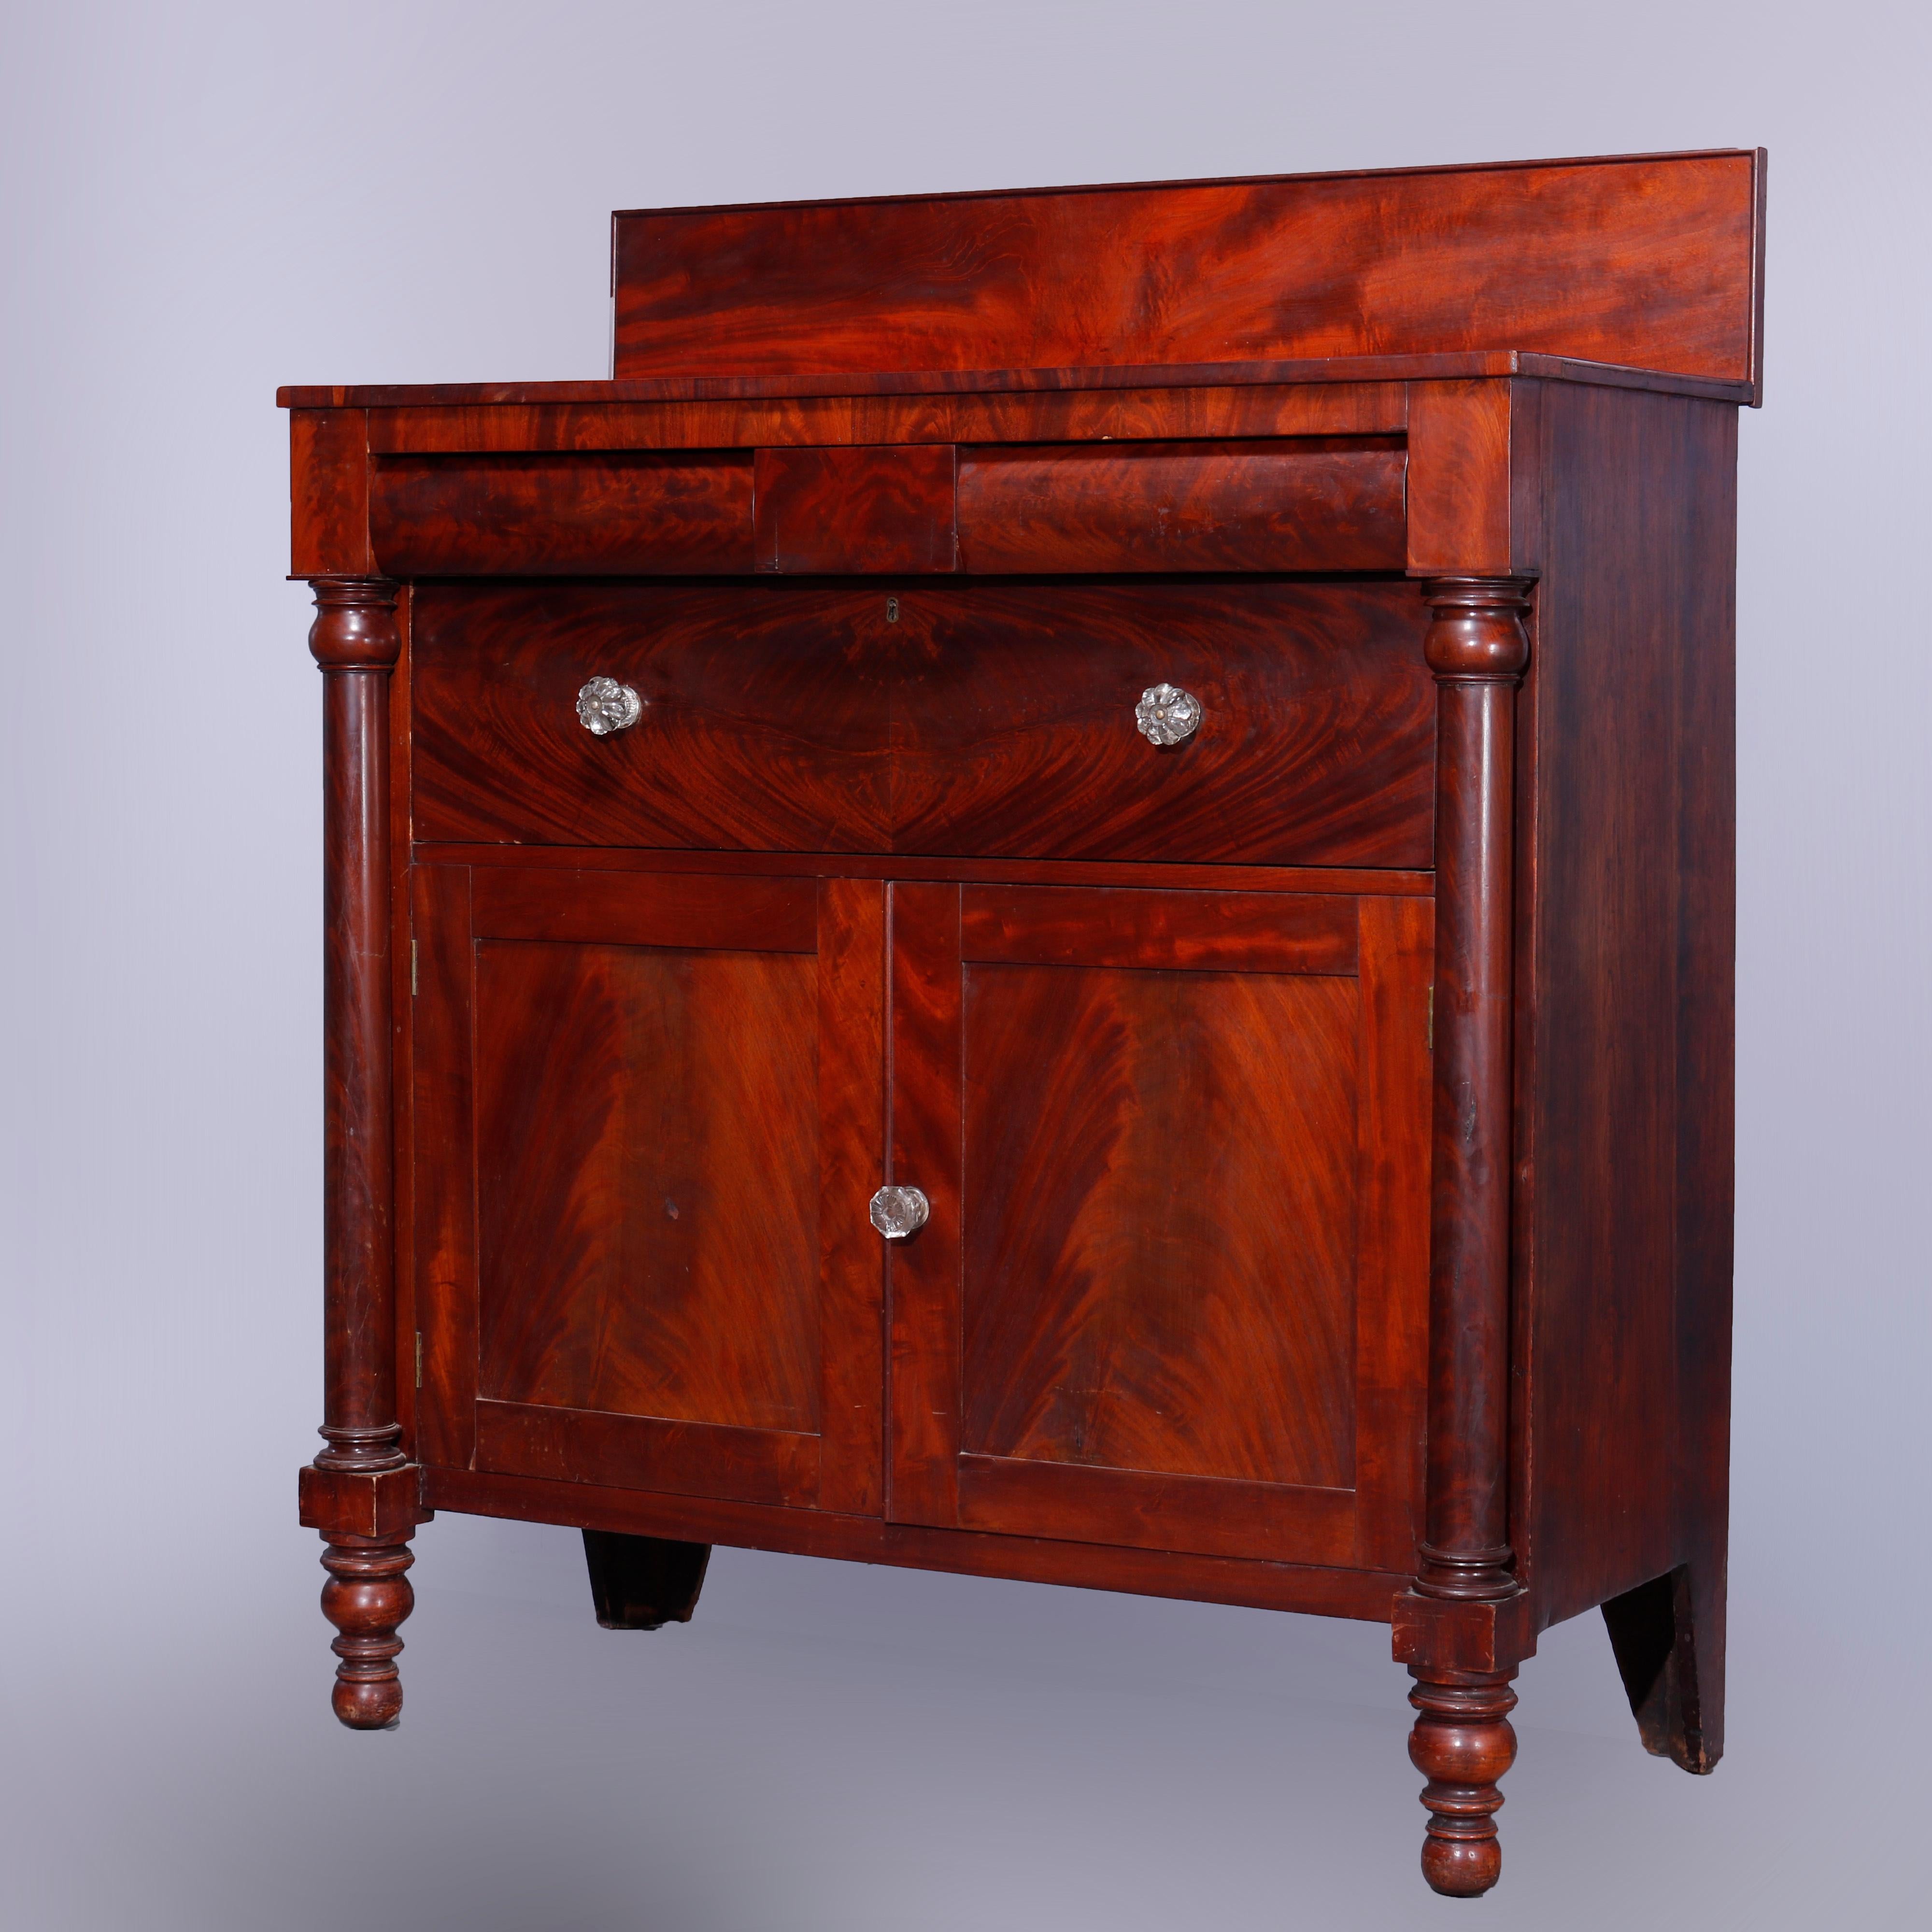 An antique American Empire classical grecian sideboard offers flame mahogany construction with backsplash surmounting case with convex double drawers over deep frieze drawer and double door lower cabinet with flanking Doric column supports, raised